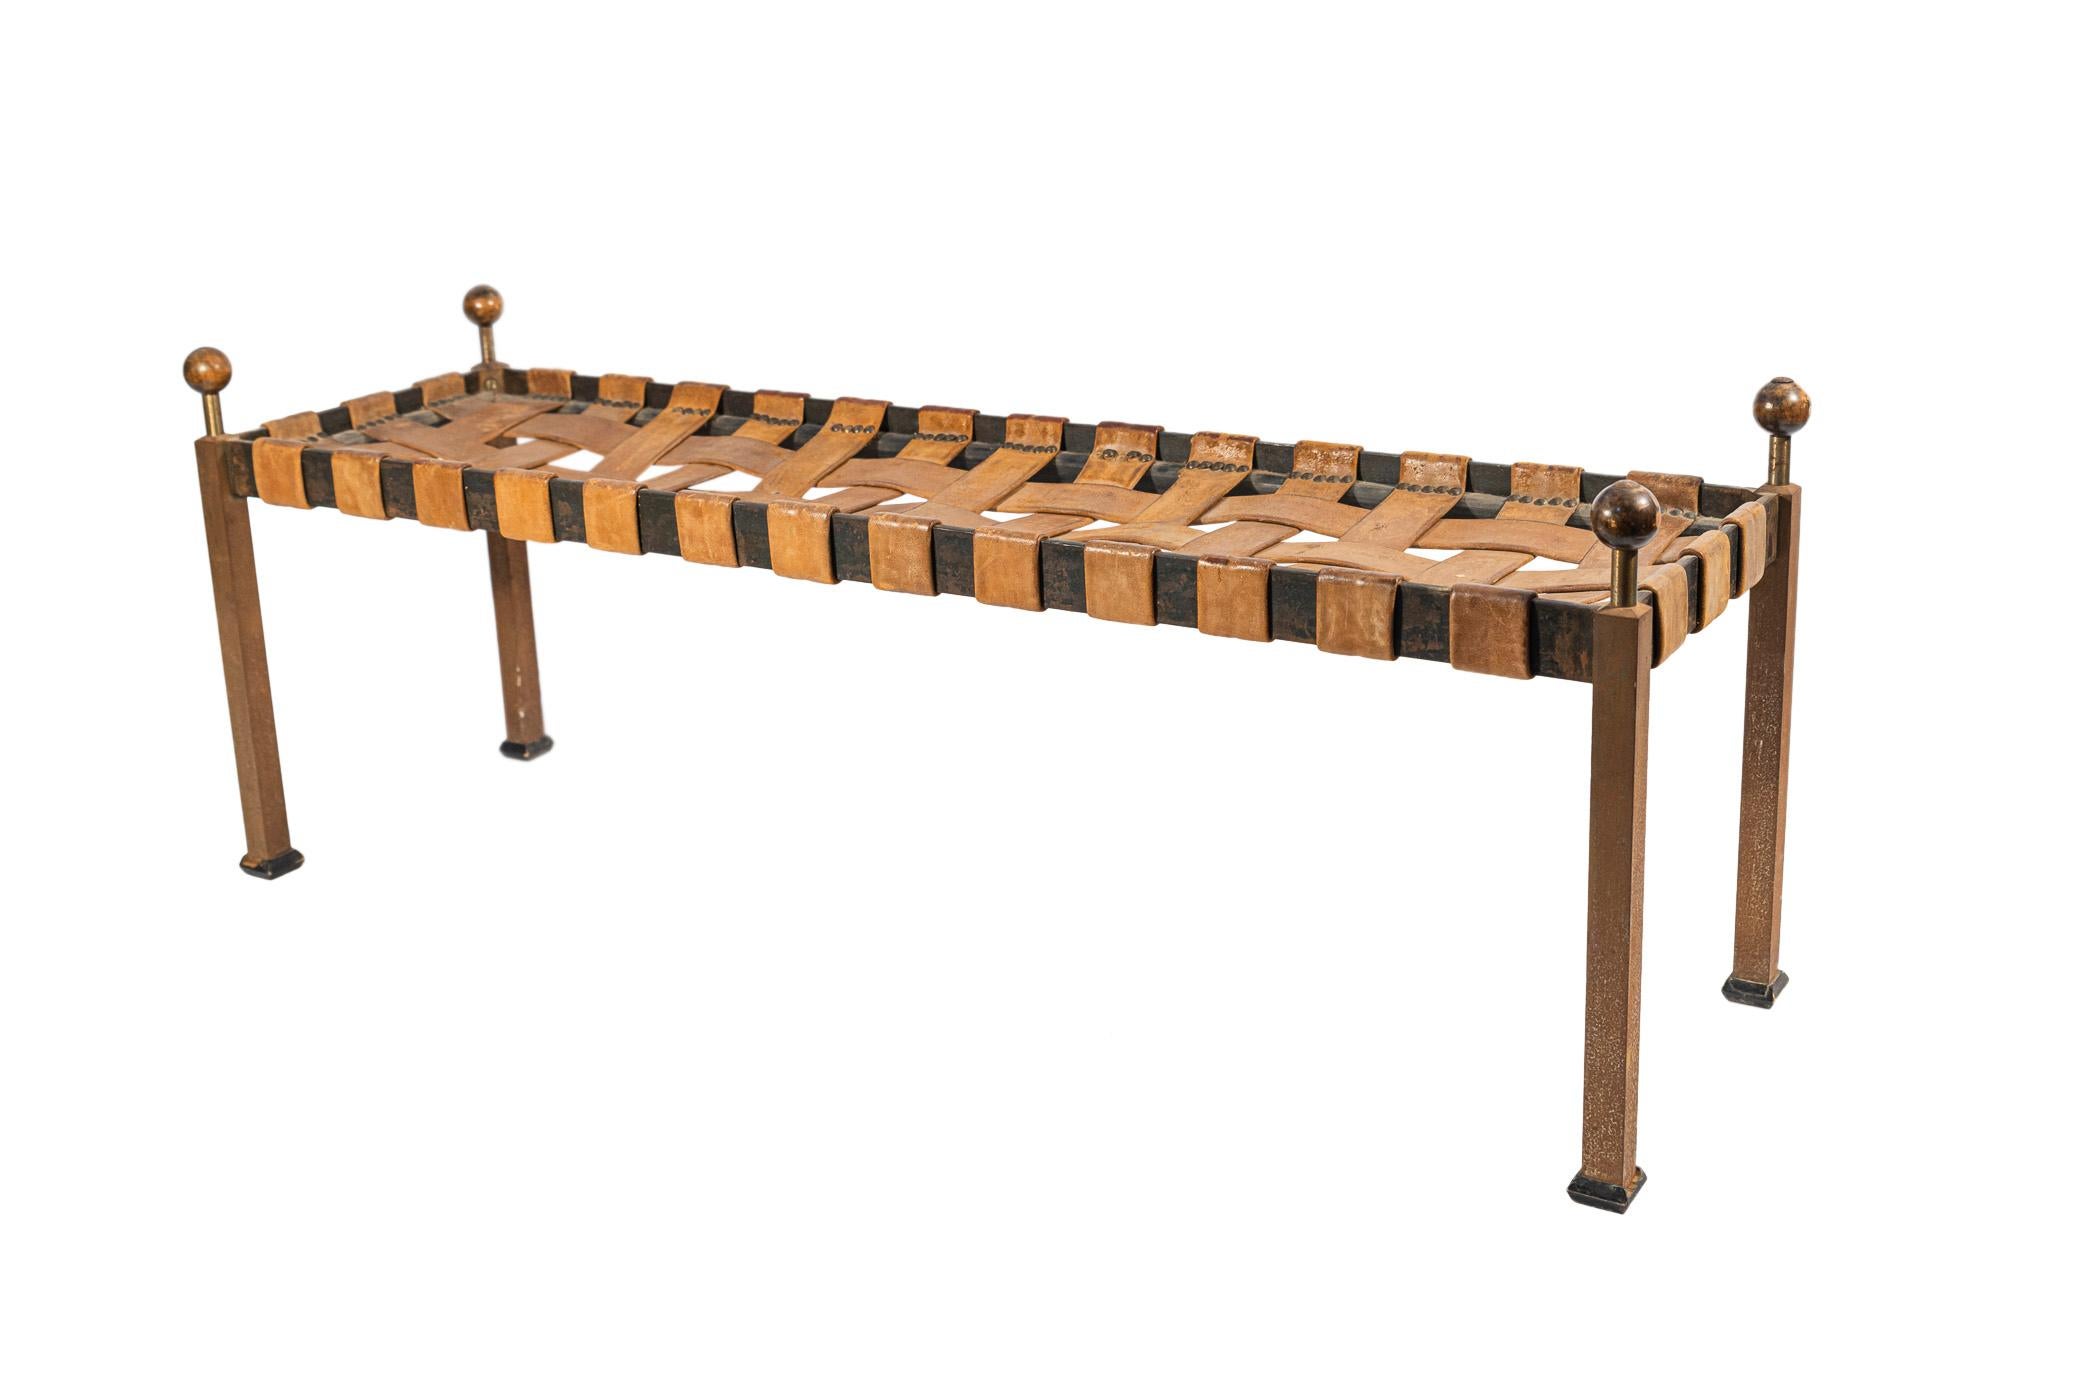 Bench in the style of the antique, 
Iron and wood,
Seating in weaved leather, 
France, circa 1940.

Measures: Width 128 cm, depth 38 cm, height 48 cm.